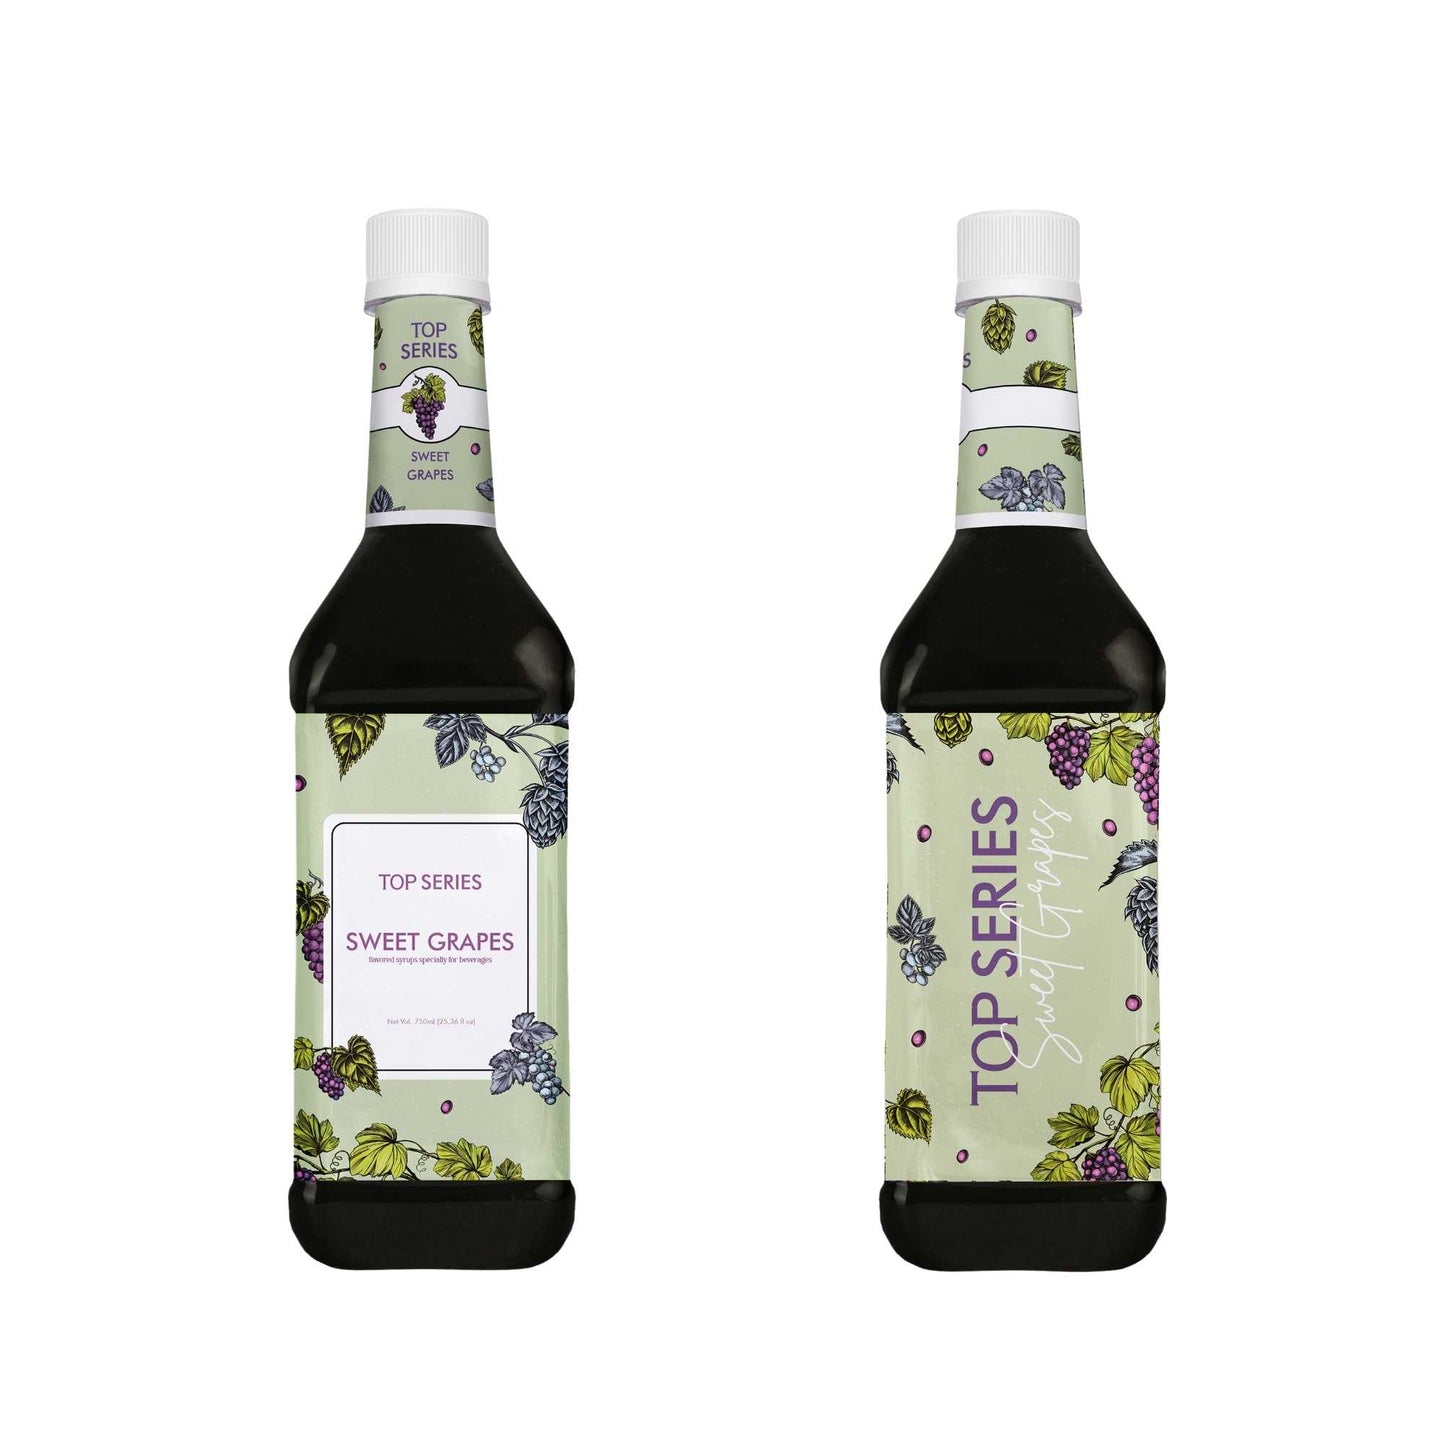 TOP Creamery Top Series Sweet Grapes Syrup 750ml